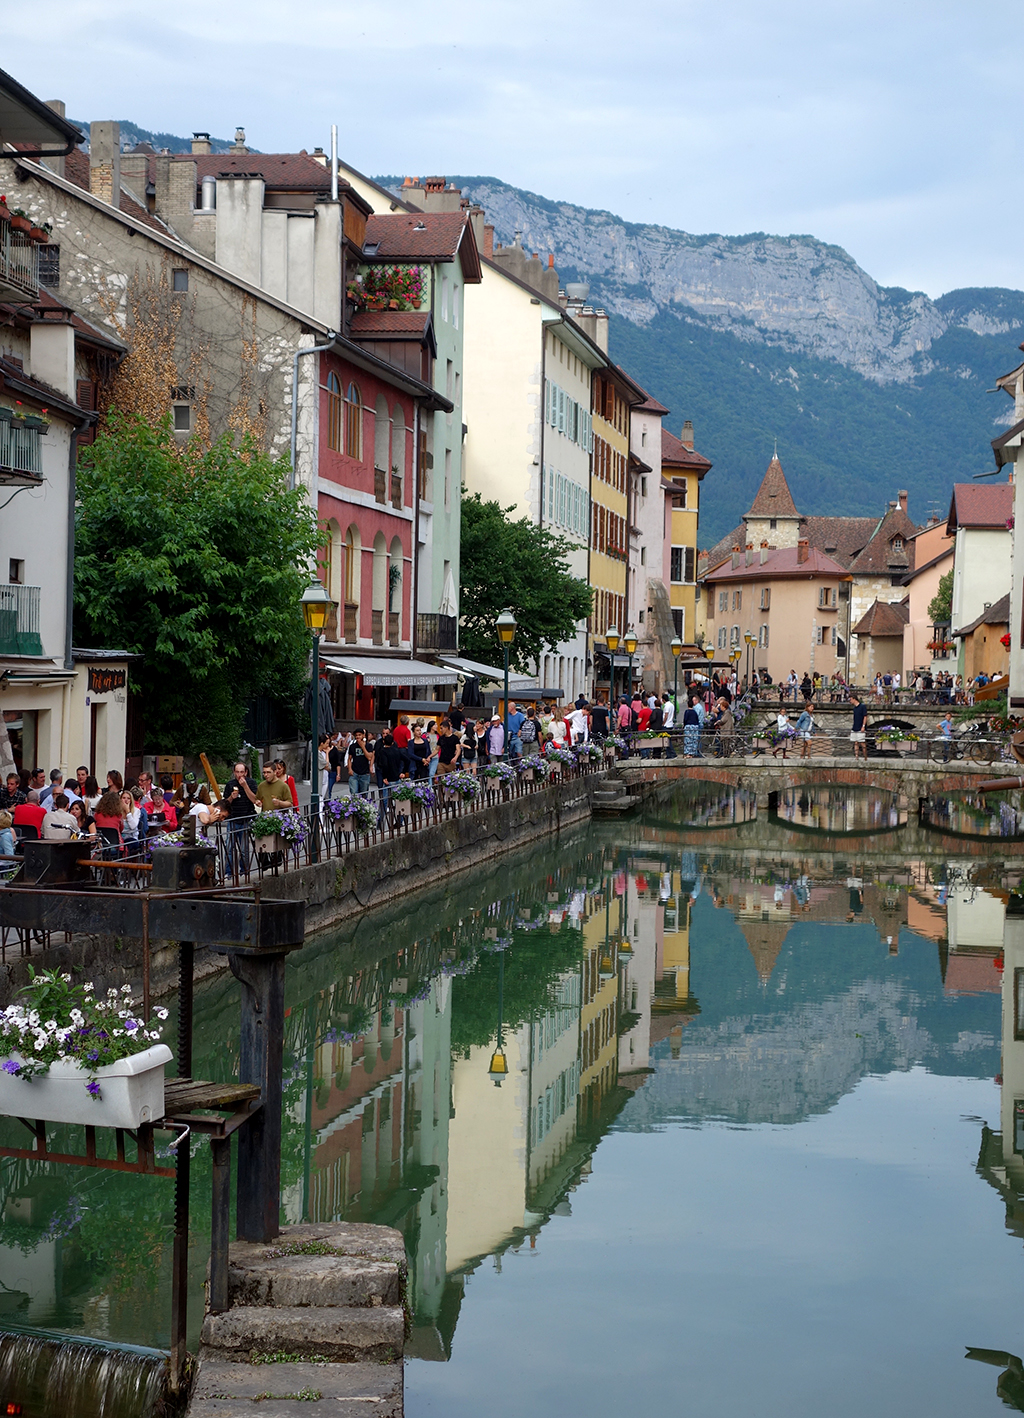 Welcome to Annecy, France